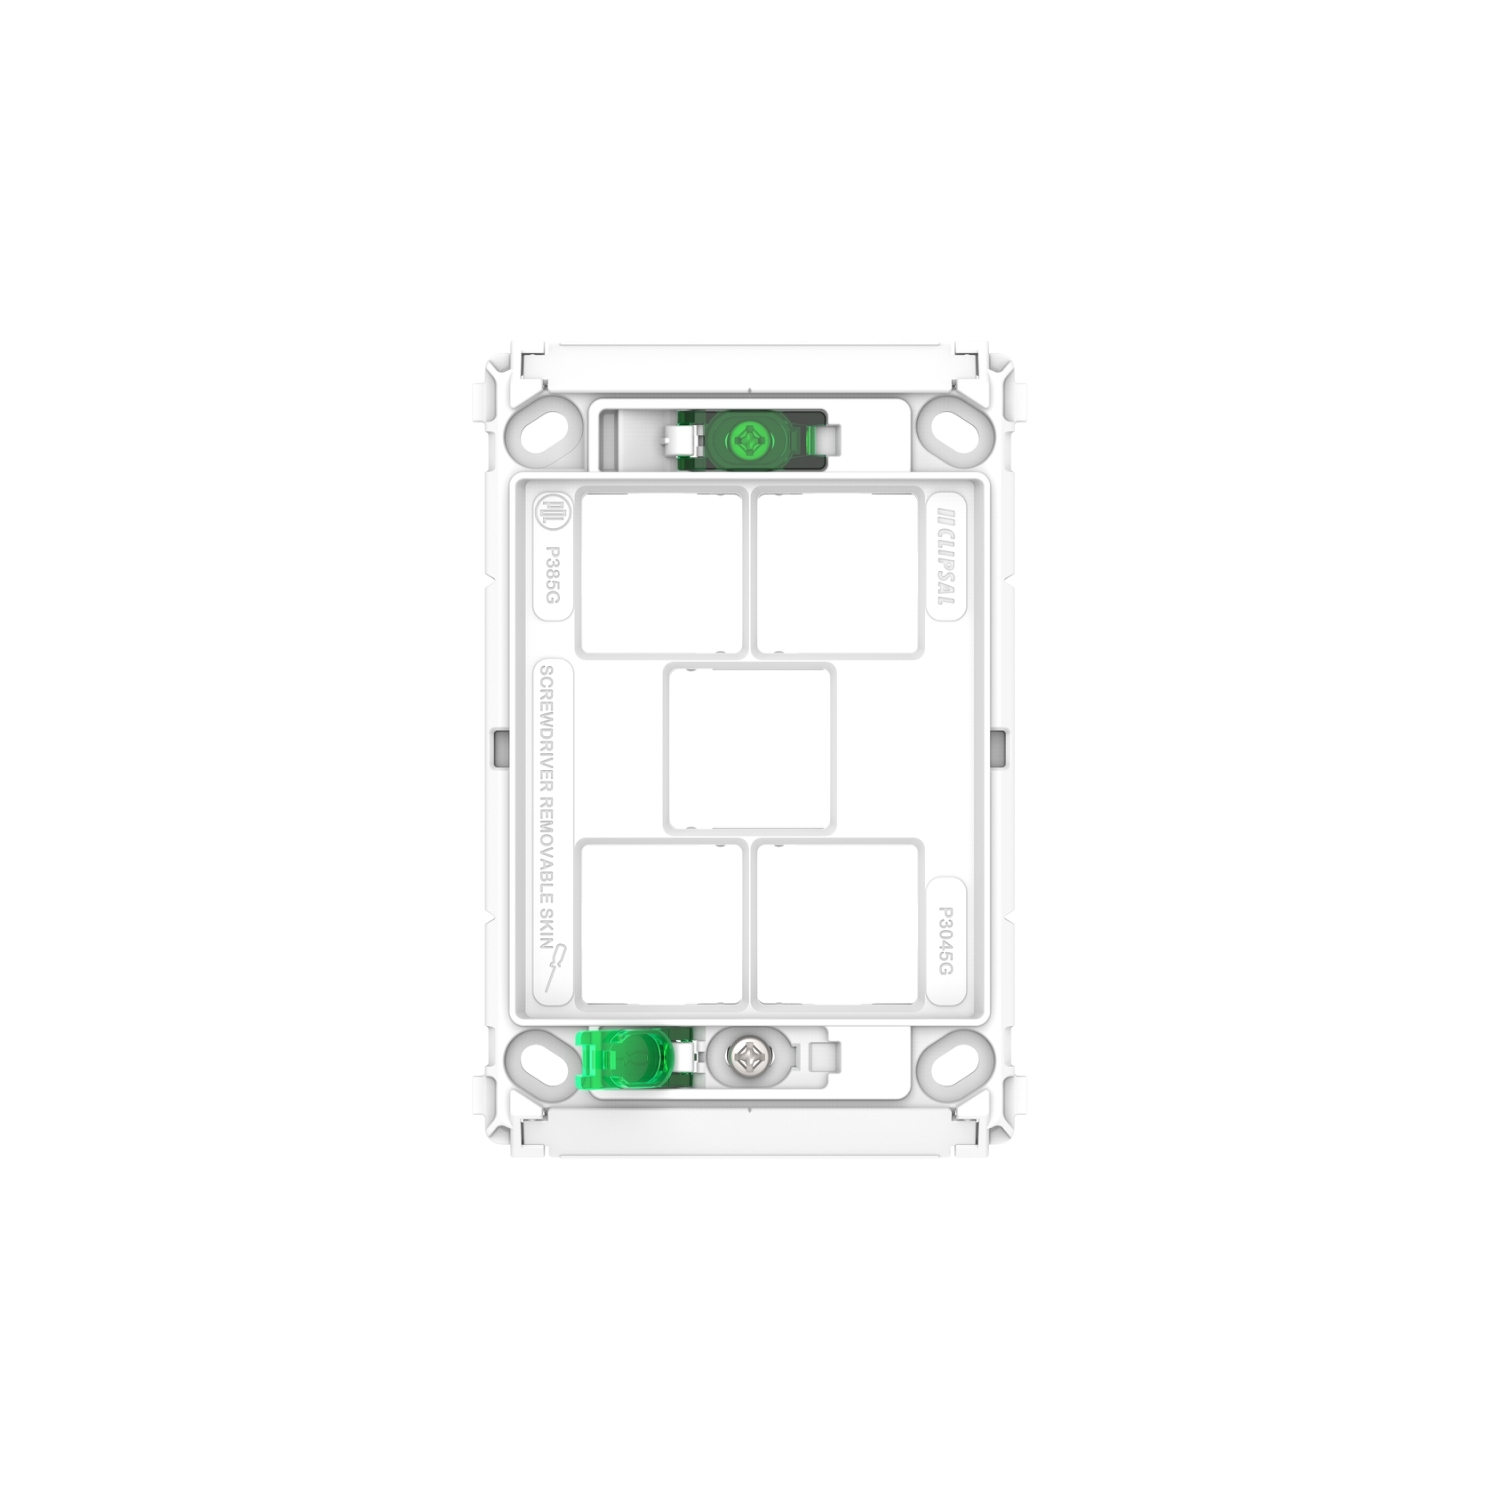 PDL Pro Series - Grid Plate Switch 5-Gang